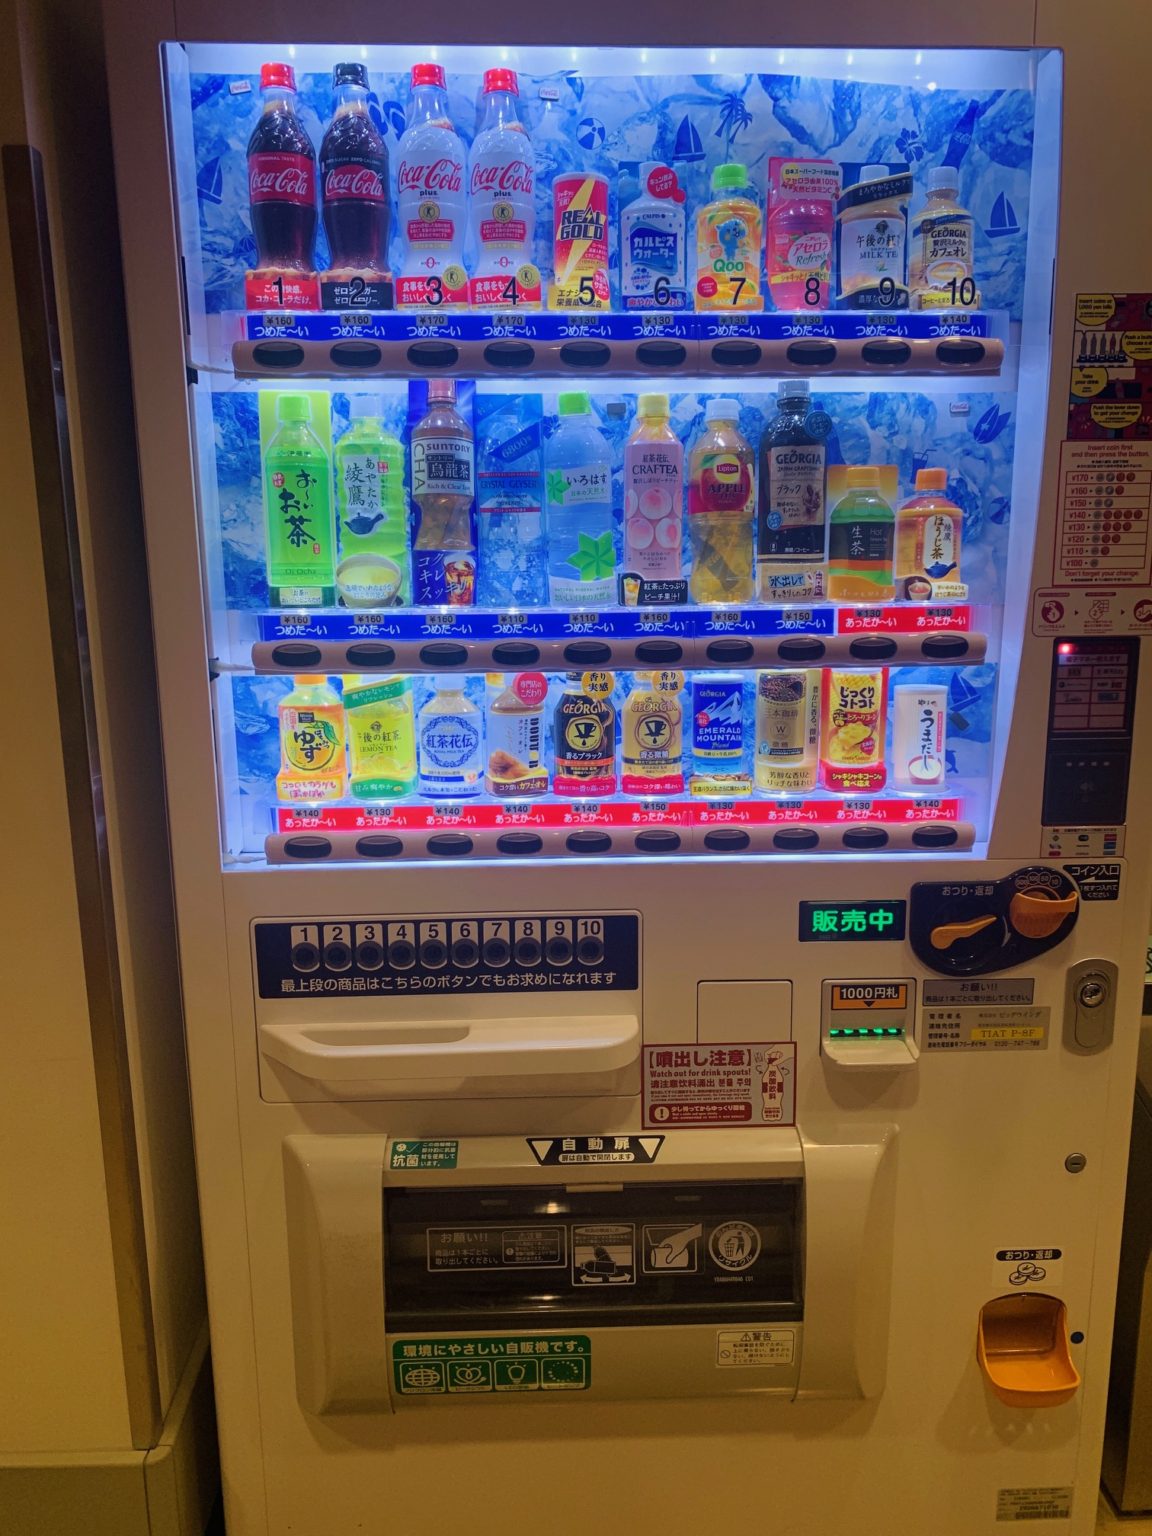 Vending machines are popular throughout Japan